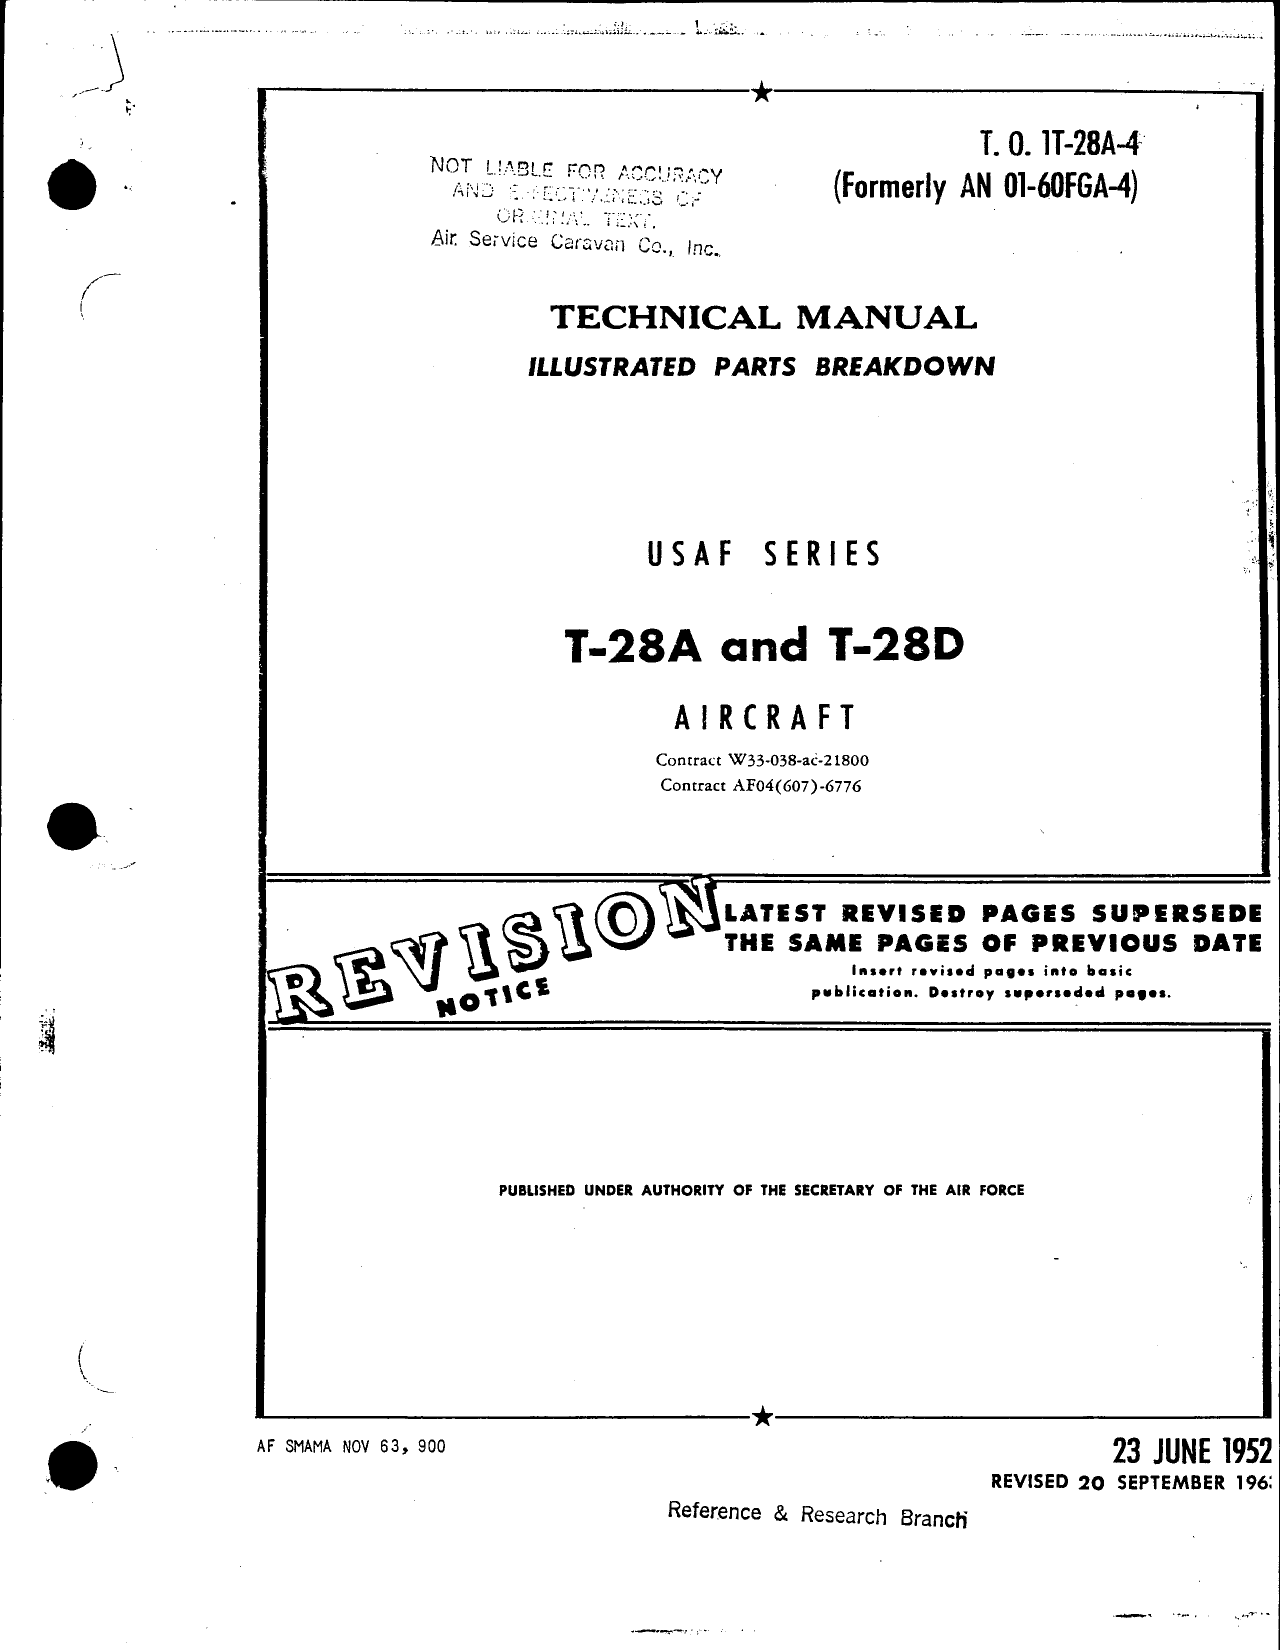 Sample page 1 from AirCorps Library document: Technical Manual Illustrated Parts Breakdown for T-28A and T-28D